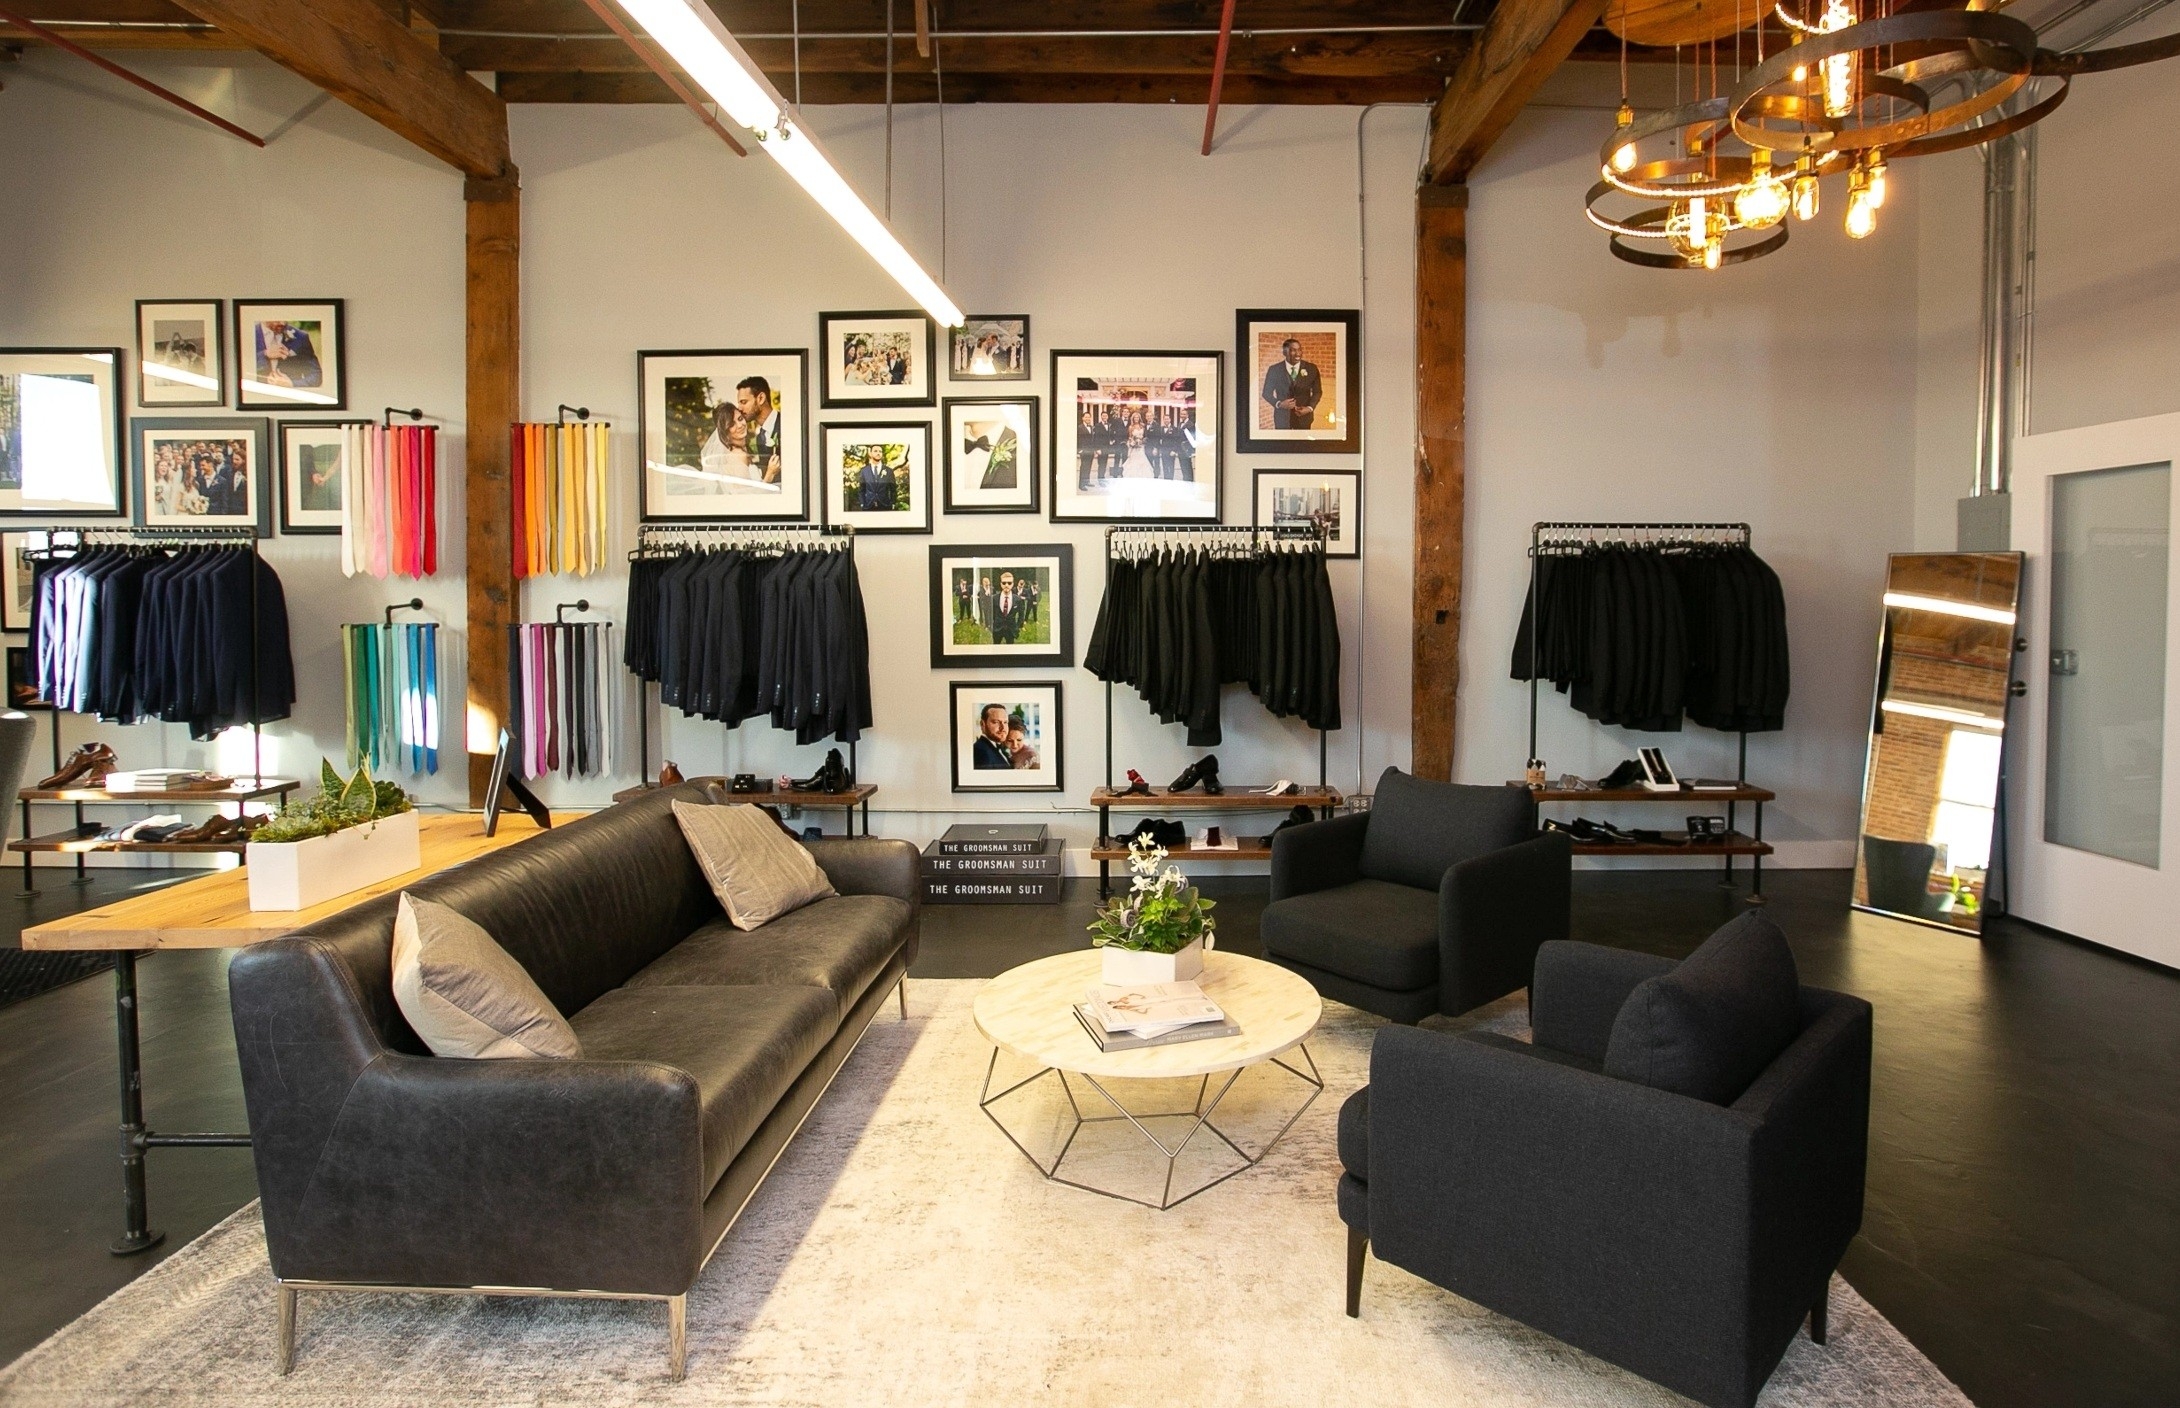 Interior of suit store in Chicago with black suits, grey suits, colorful accessories, and lounge area.